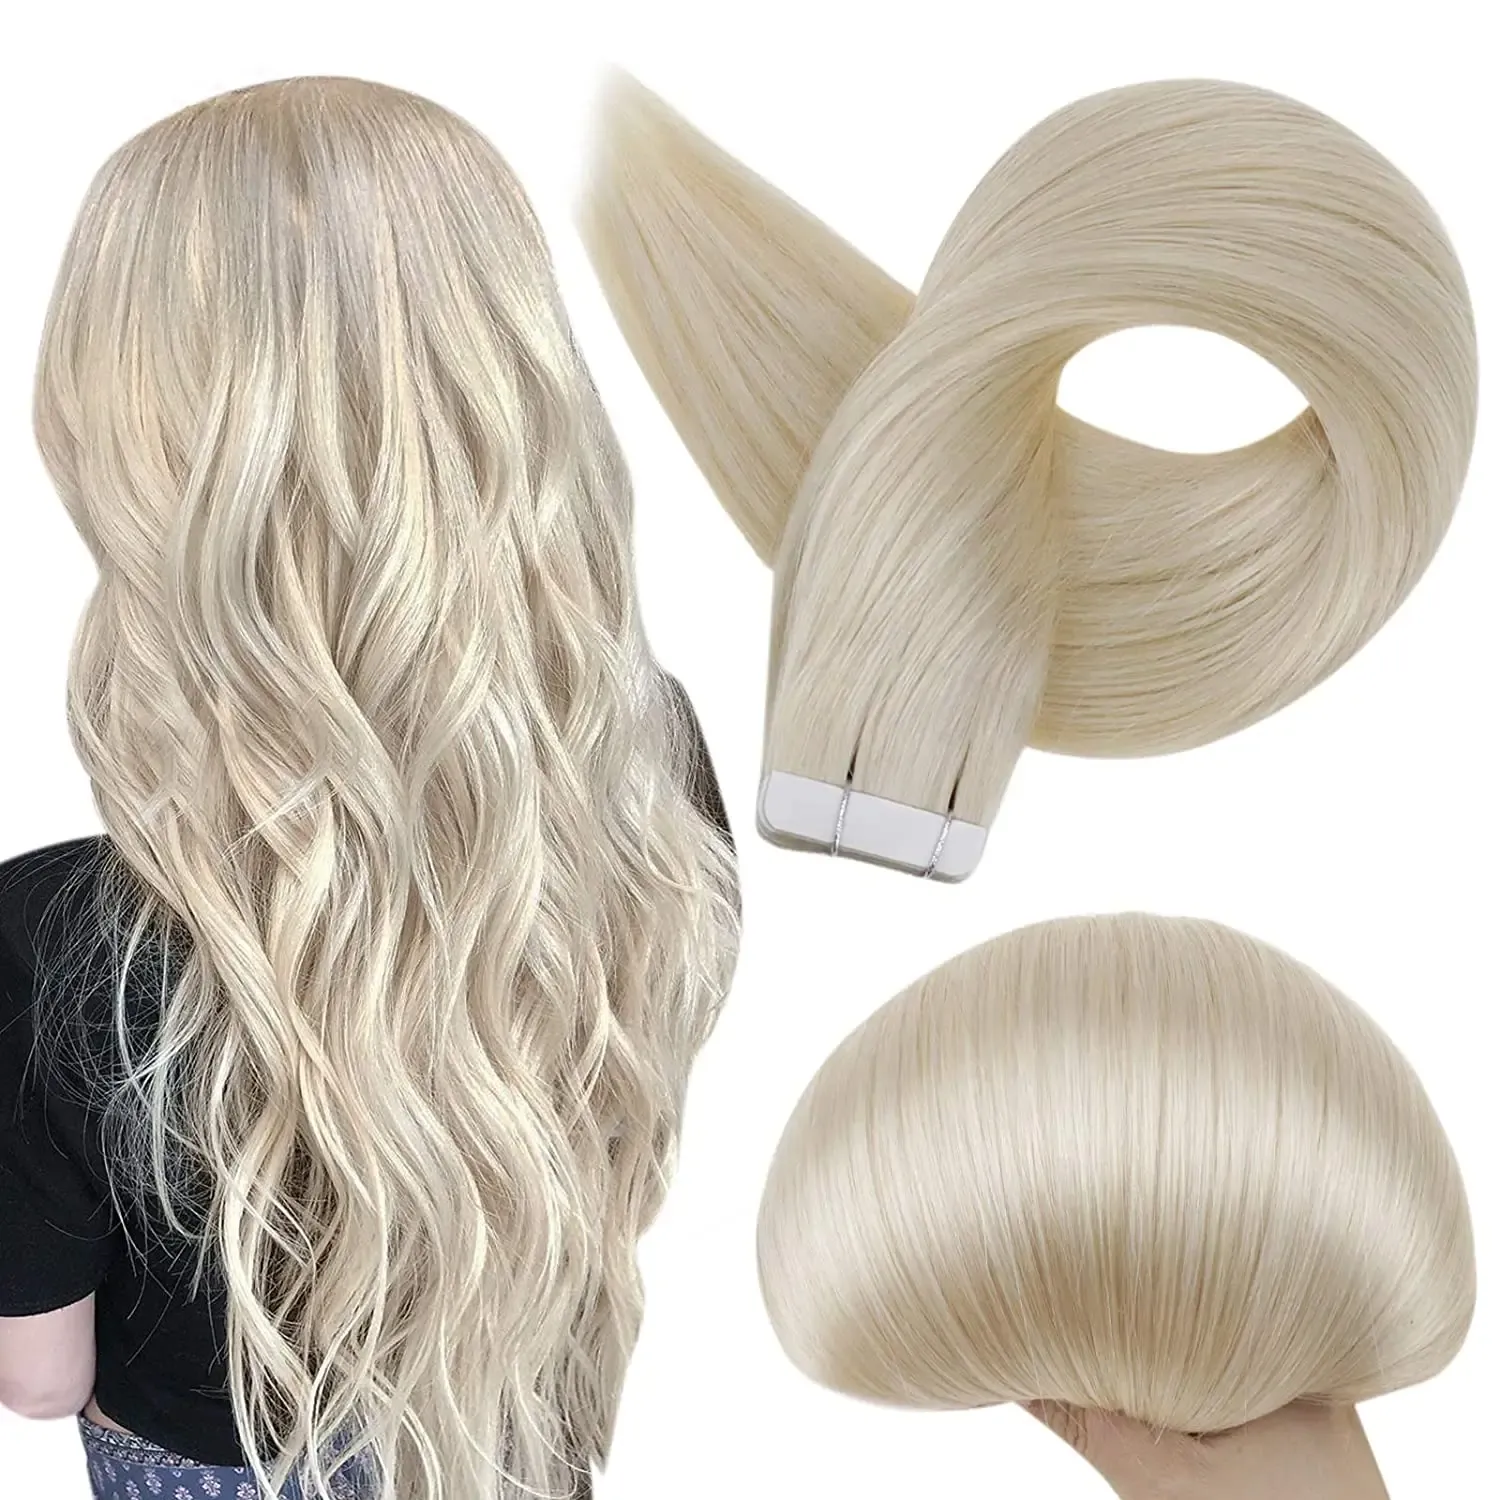 Extensions Full Shine Tape in Hair Extensions Hair Human Human 60 Platinum Blonde Ruban Extensions Hair Real Hair Samless Skin Waft Extensions